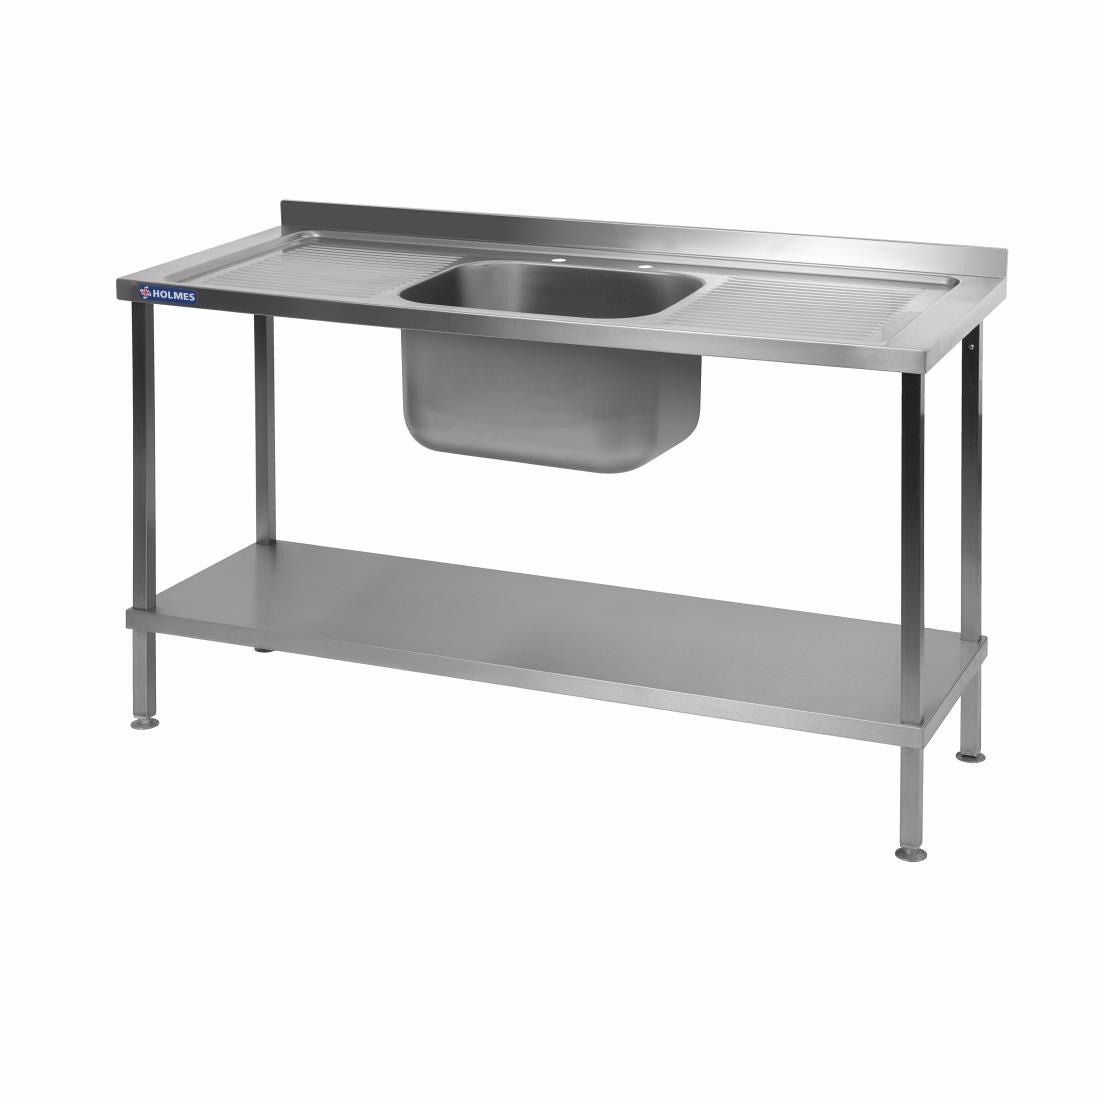 Holmes Stainless Steel Sink Double Drainer 1800mm - DR397